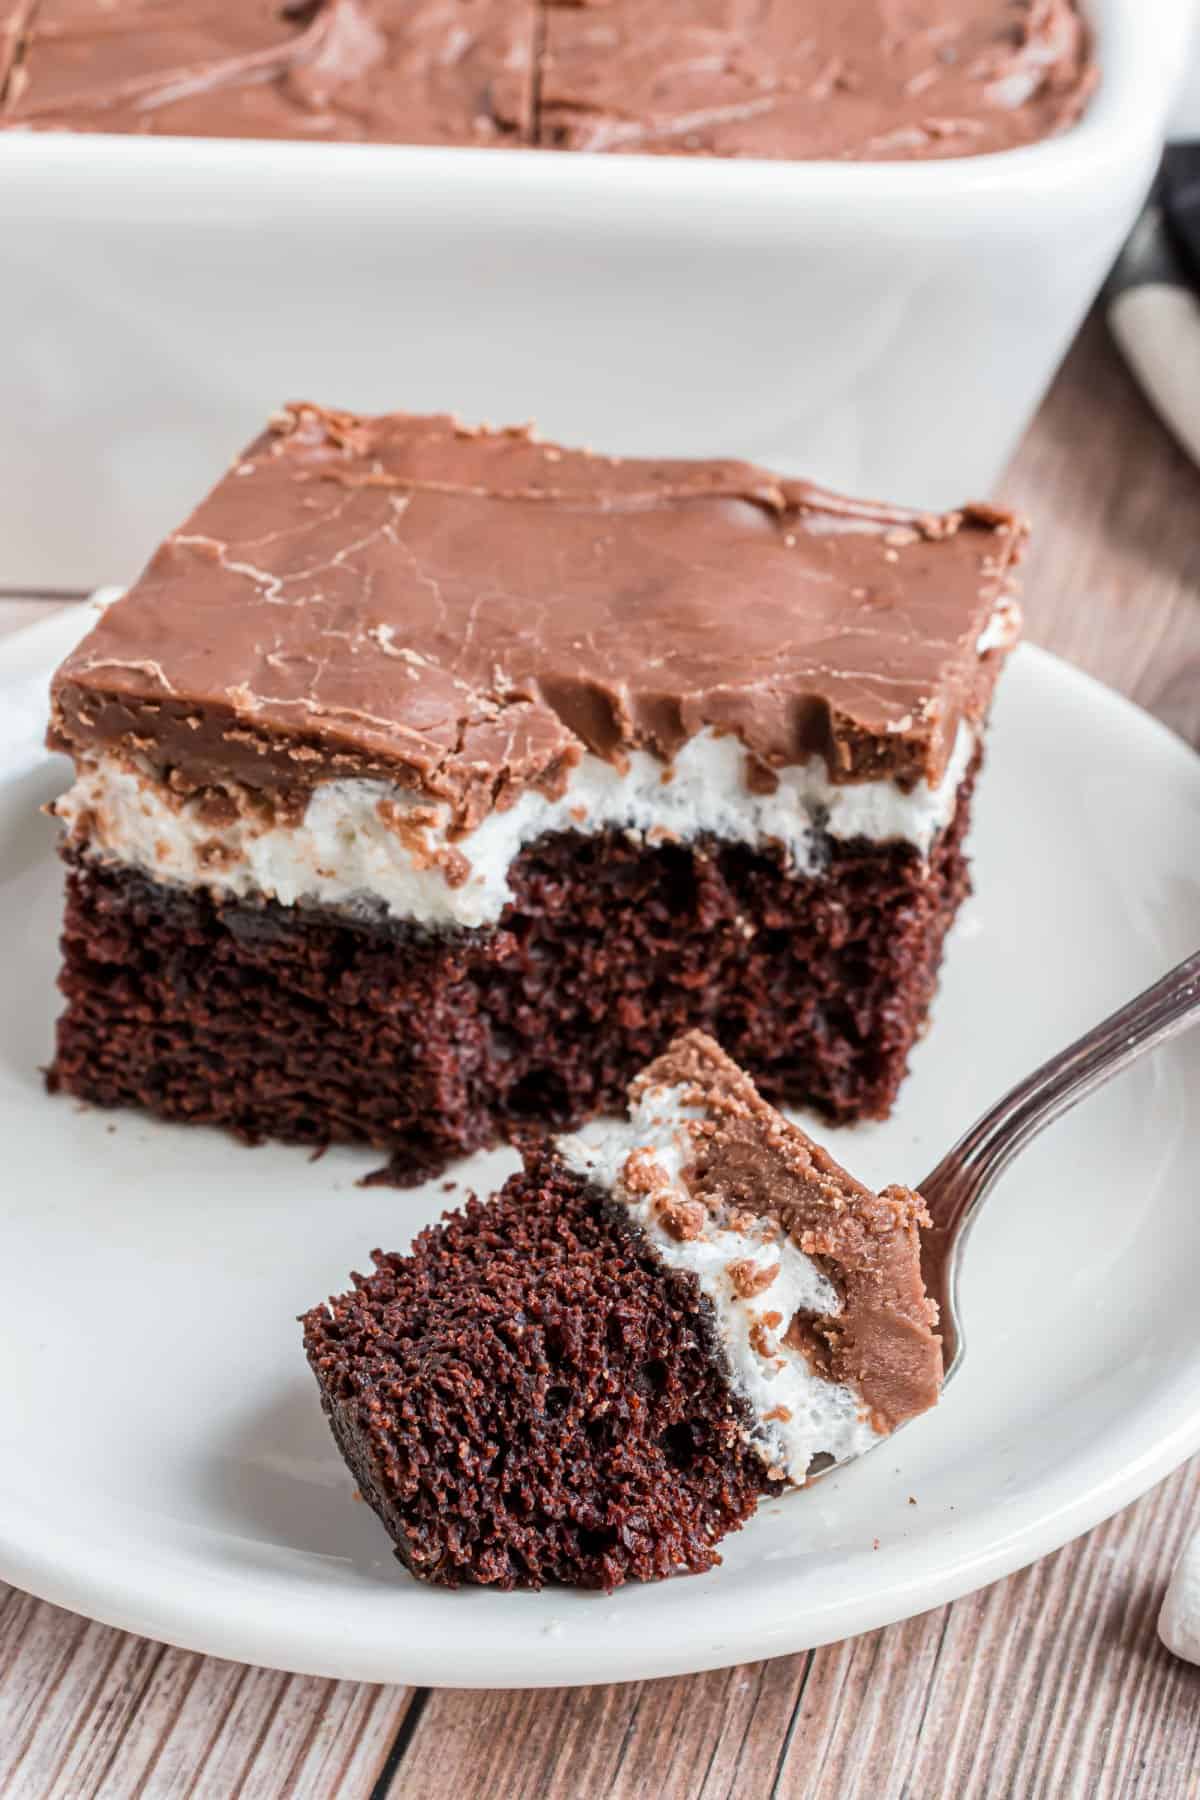 Slice of chocolate cake with marshmallow and chocolate frosting on a white plate.